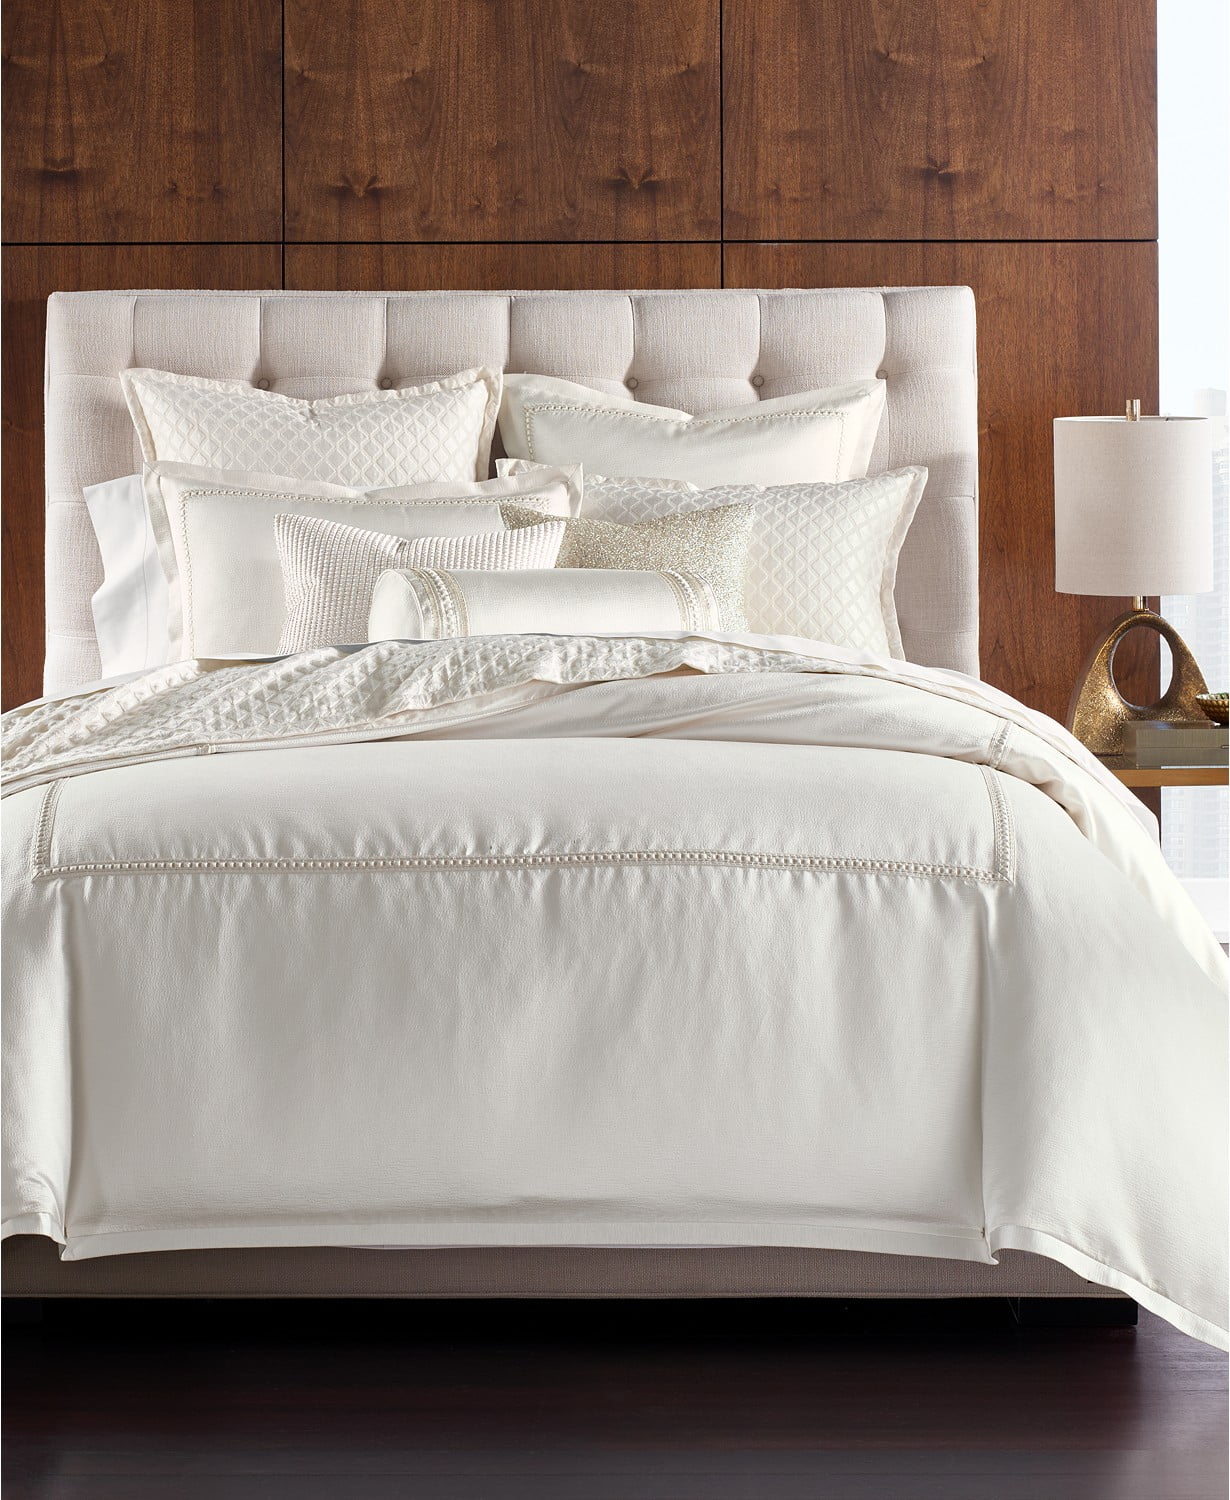 Hotel Collection Luxe Border Cotton King Duvet Cover, 110 Inches x 96 Inches, Ivory (New without